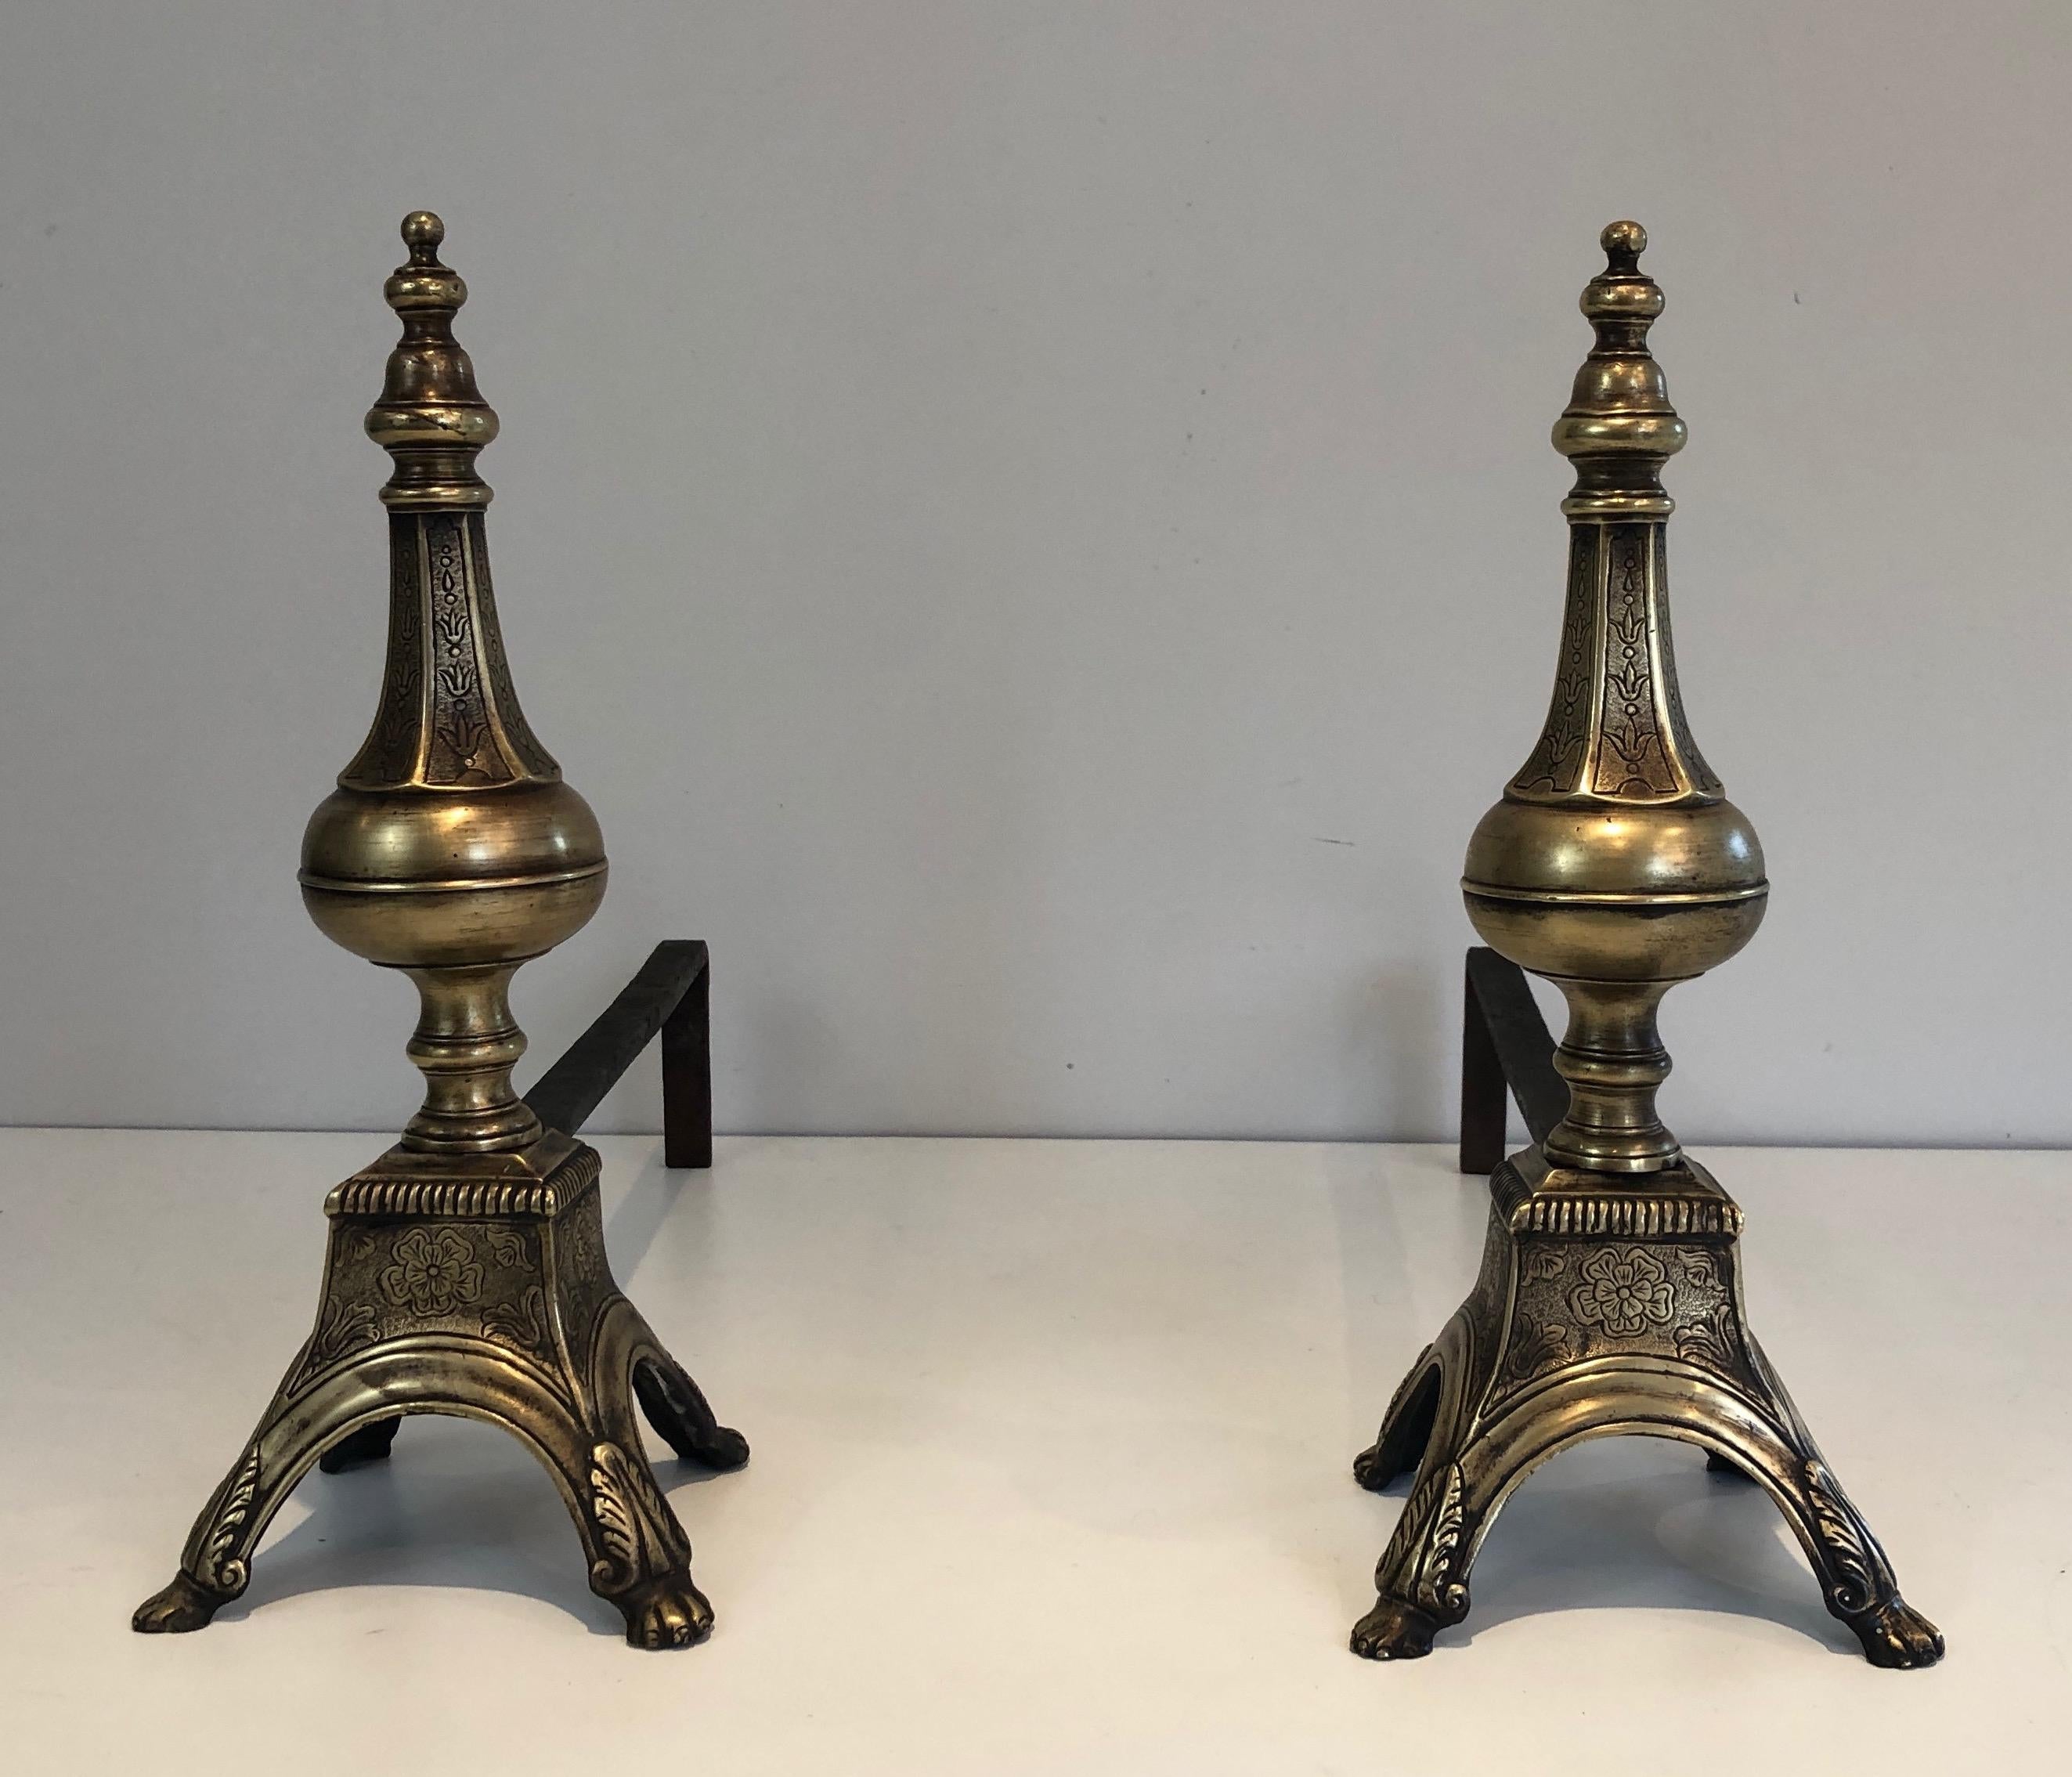 Rare Pair of Louis the 16th Style Bronze & Wrought Iron Andirons, 19th Century For Sale 7